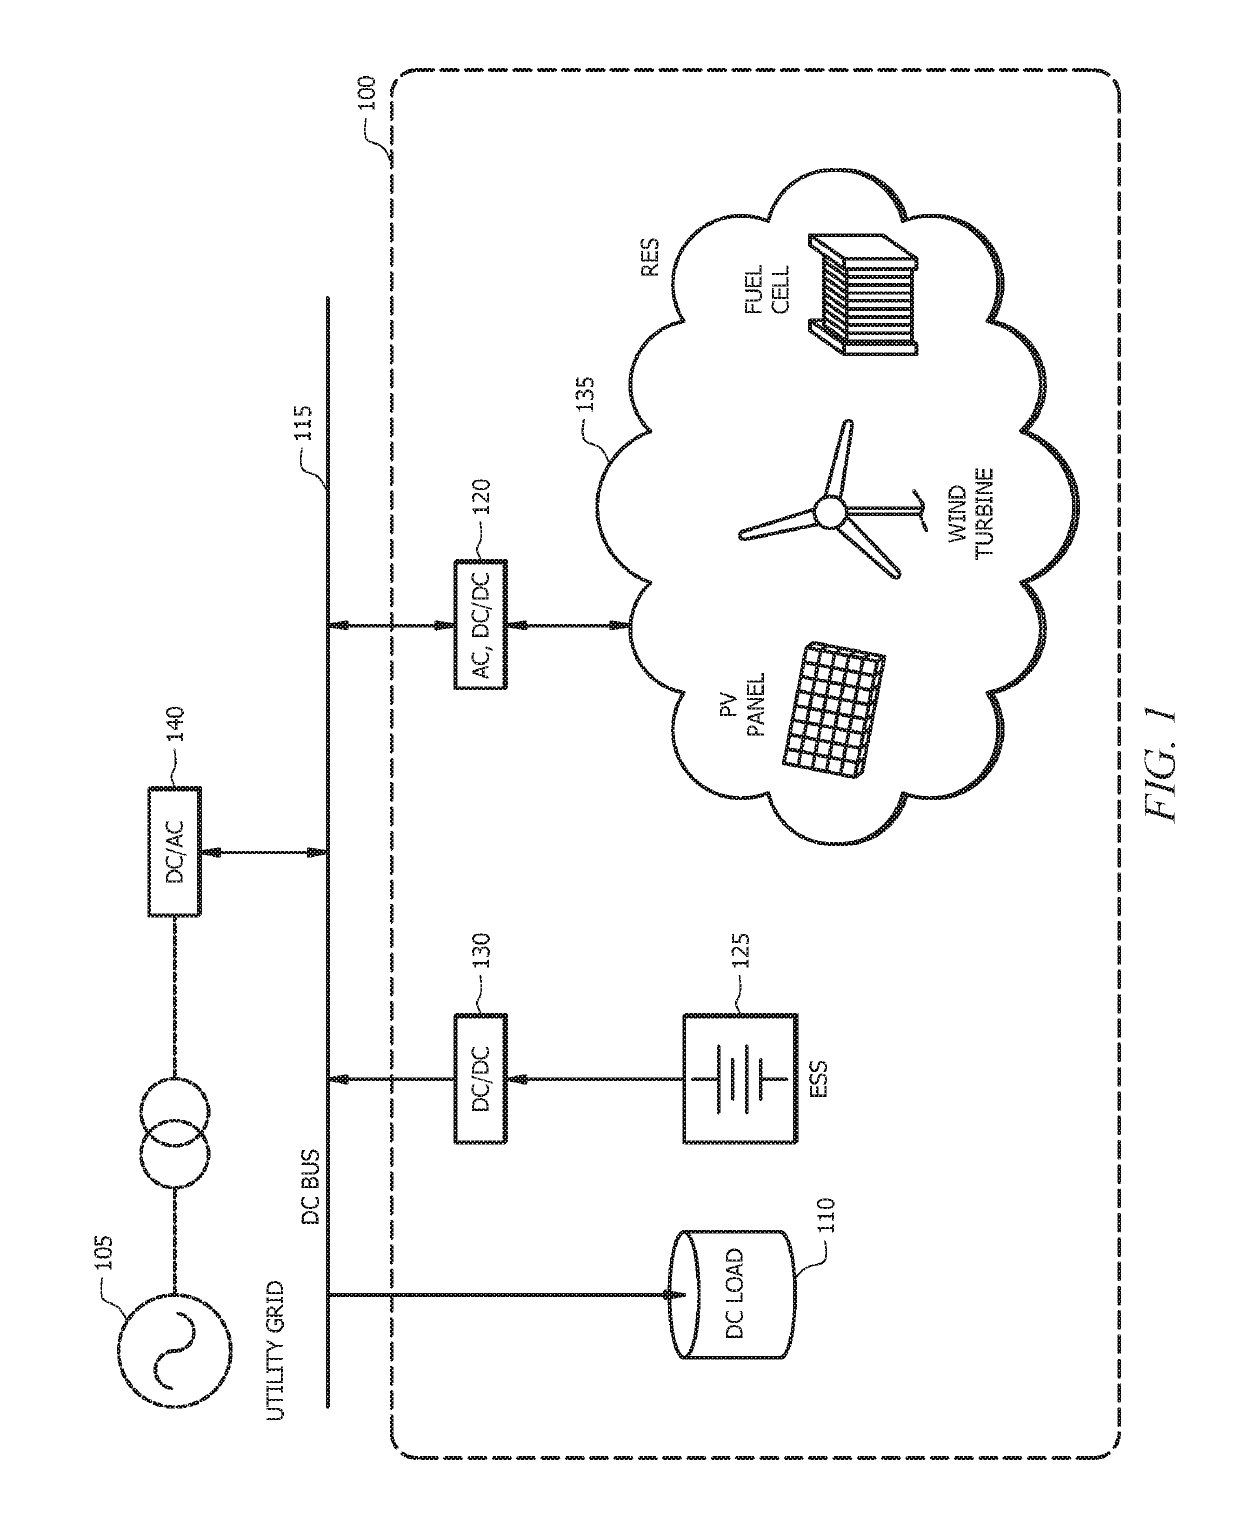 Integrated three-port bidirectional DC-DC converter for renewable energy sources